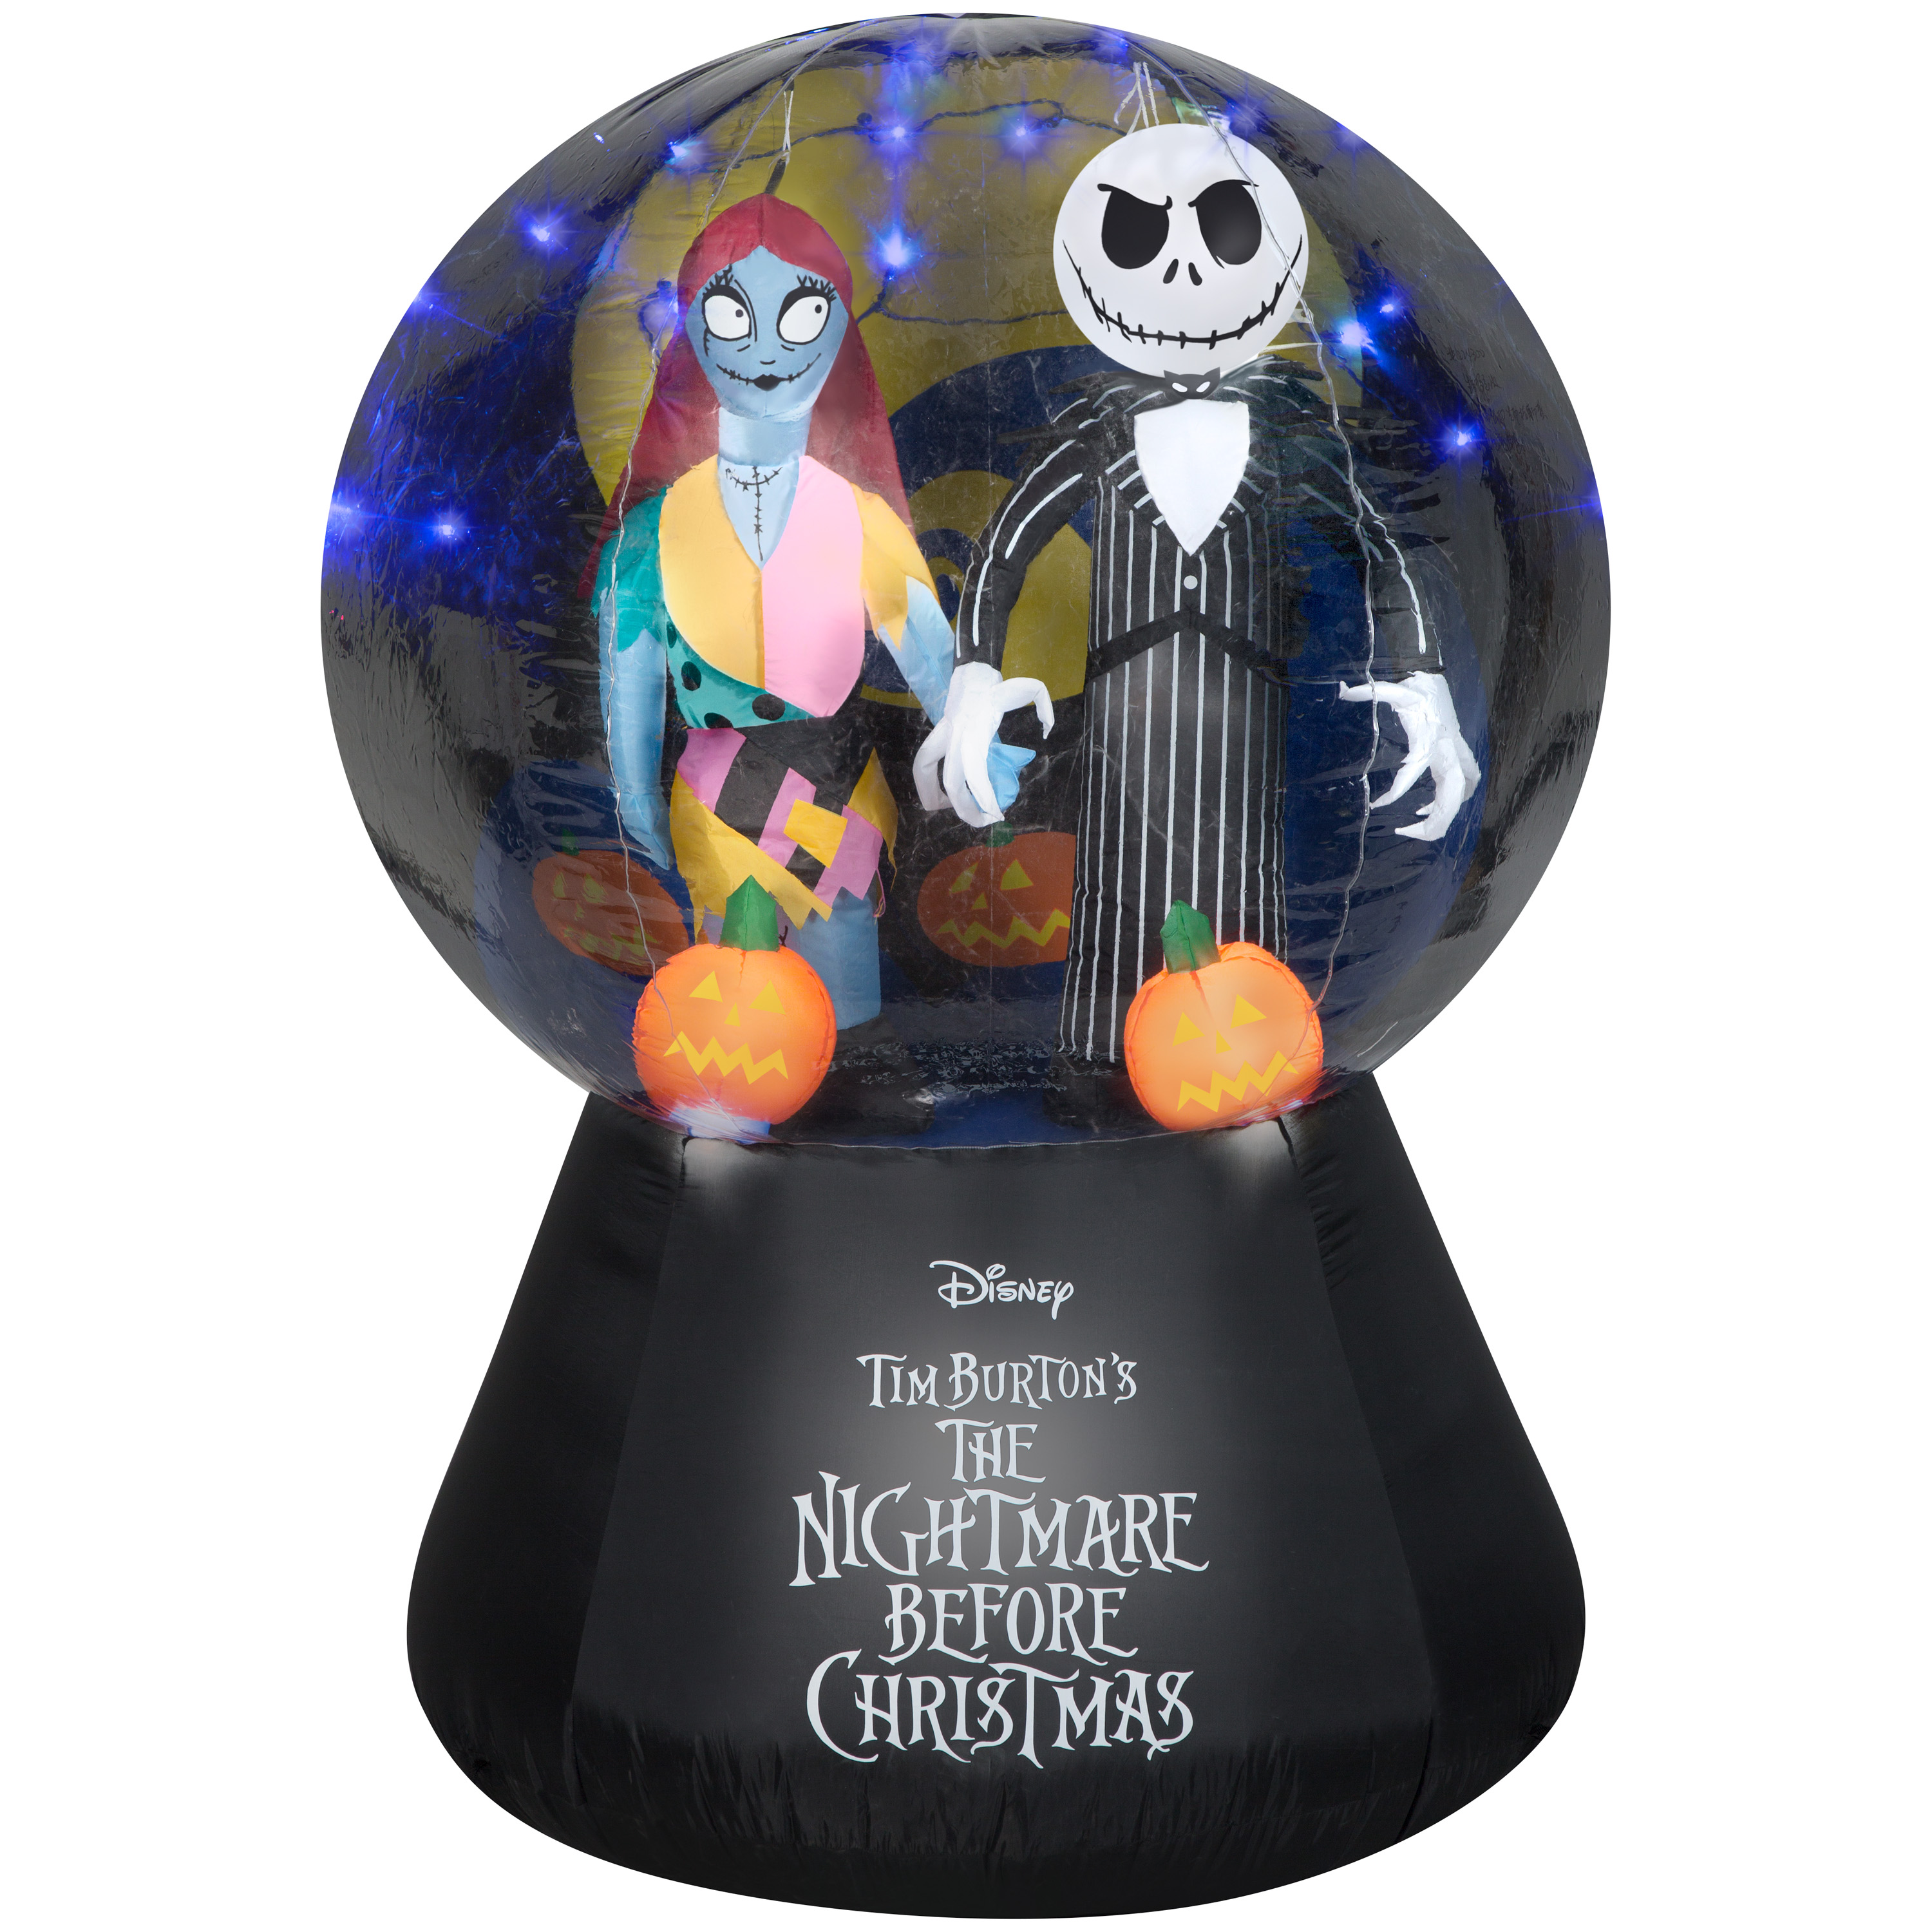 Halloween Airblown Inflatable Nightmare Before Christmas Jack and Sally Globe Scene - image 1 of 5